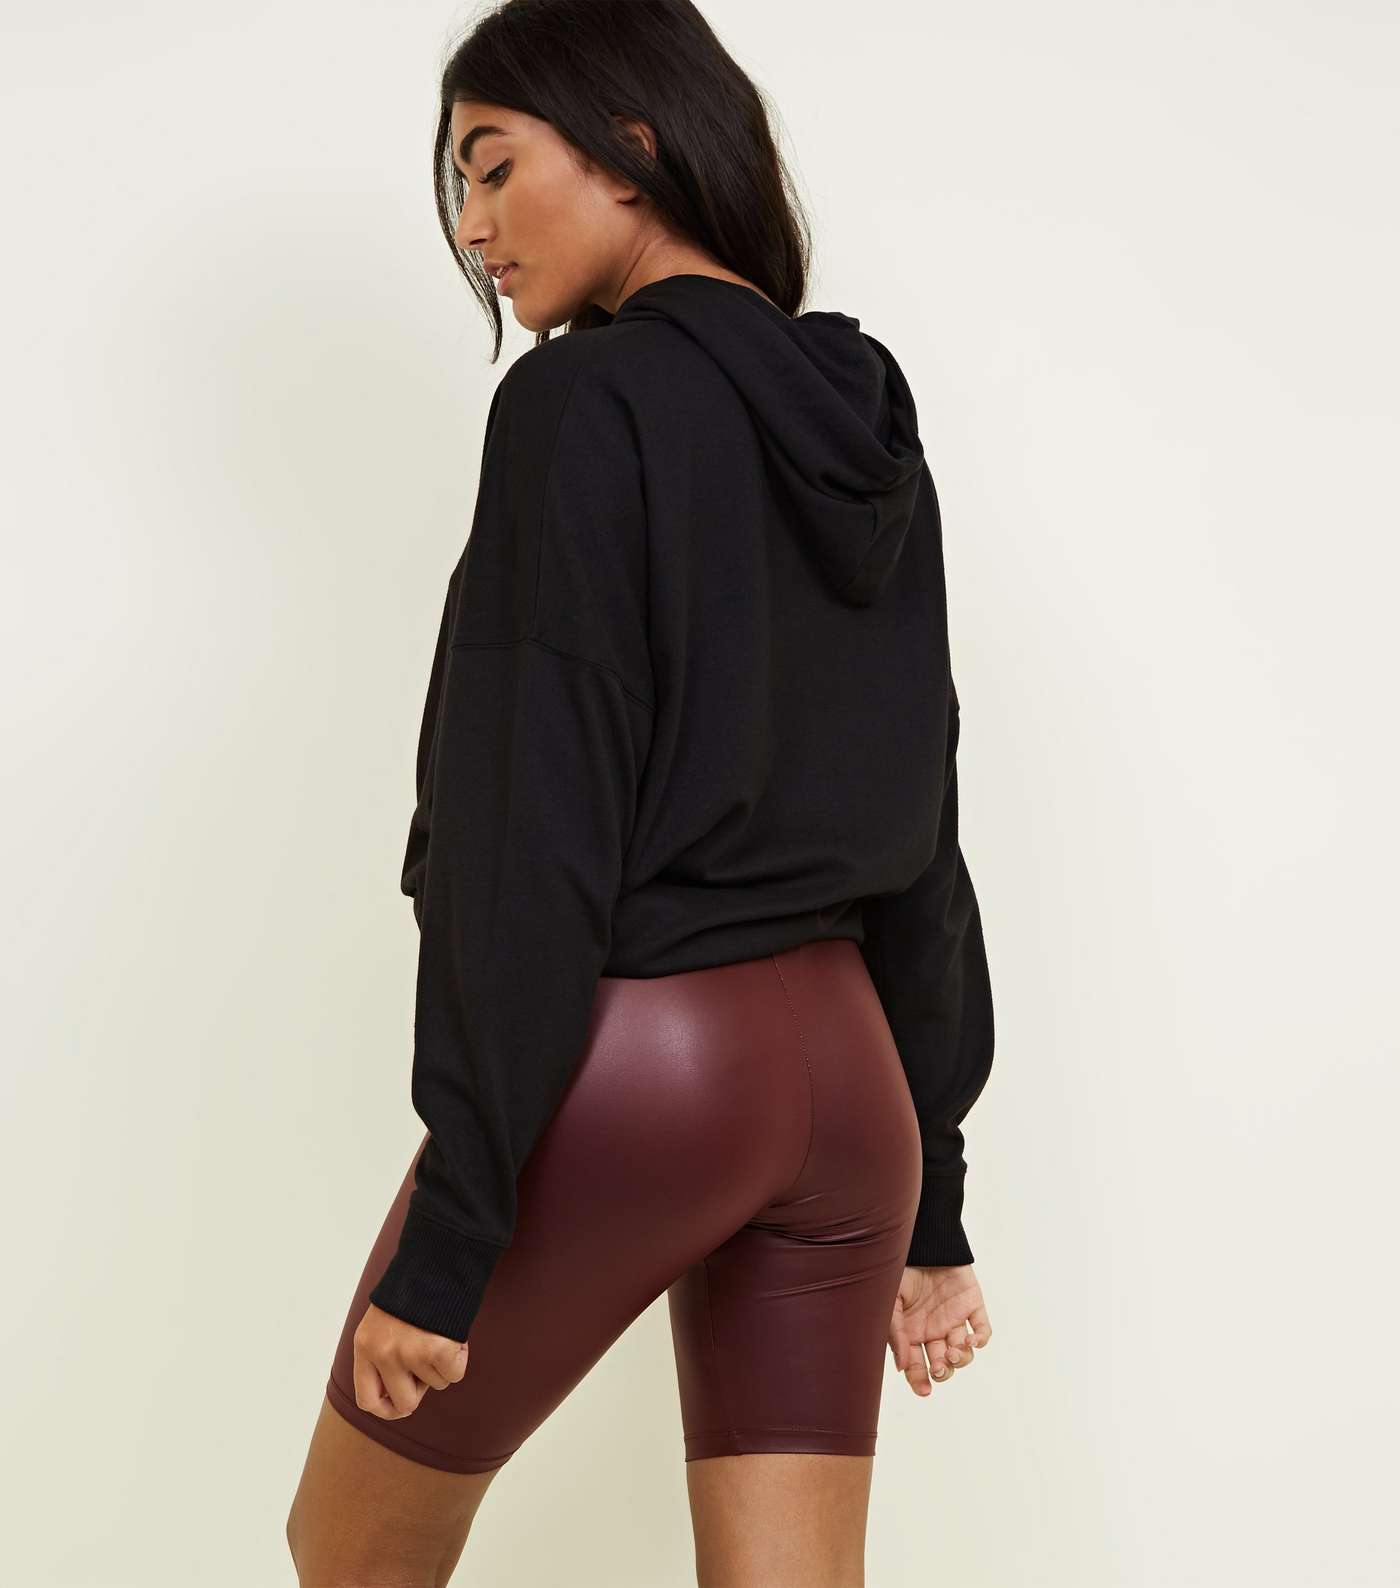 Burgundy Wet Look Cycling Shorts Image 3